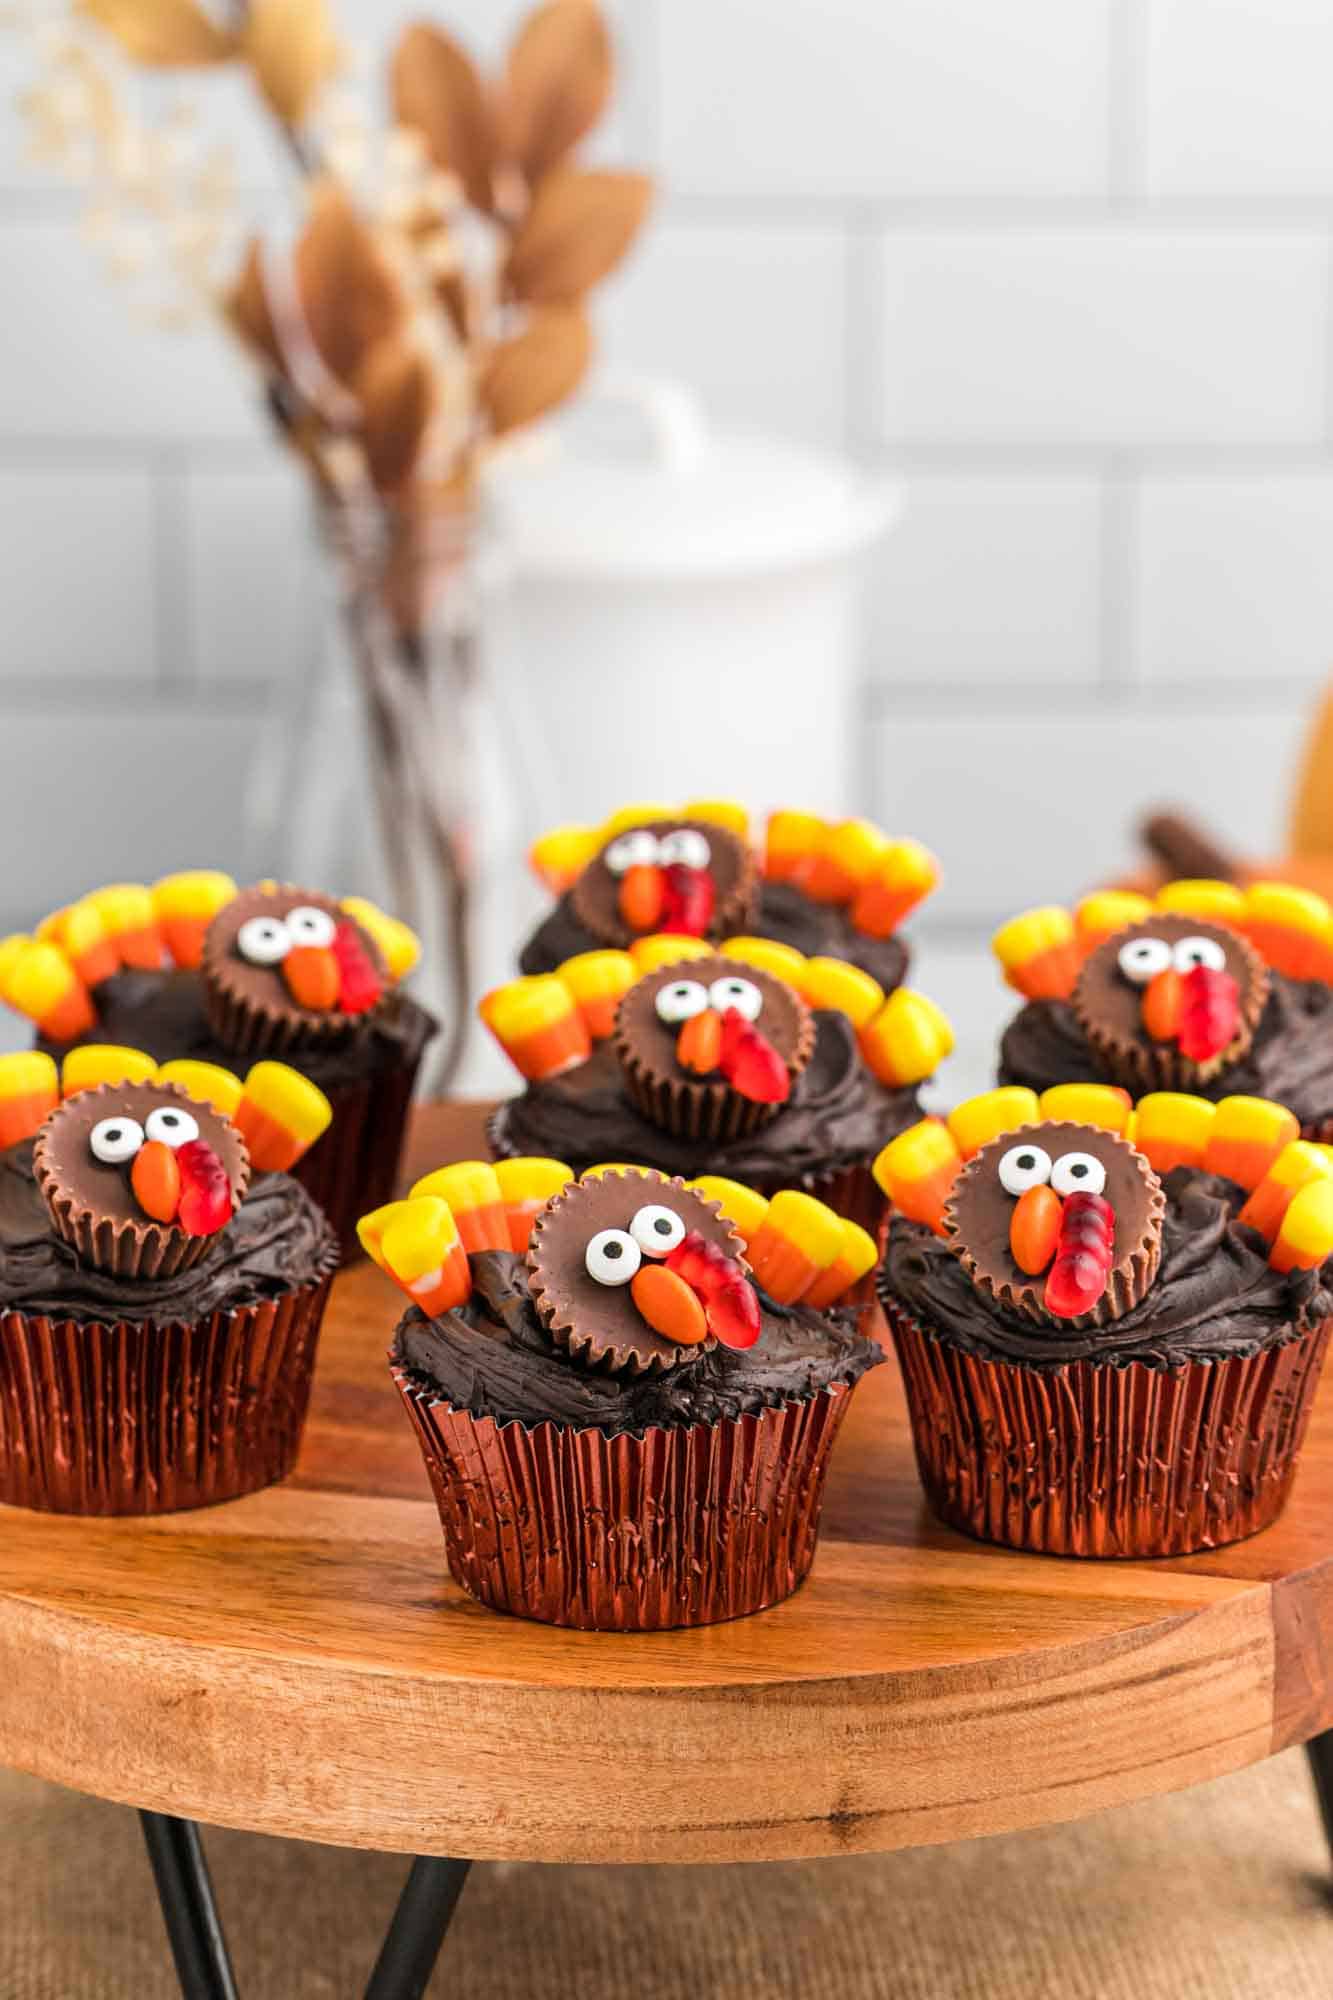 Seven turkey decorated cupcakes on a wooden tray